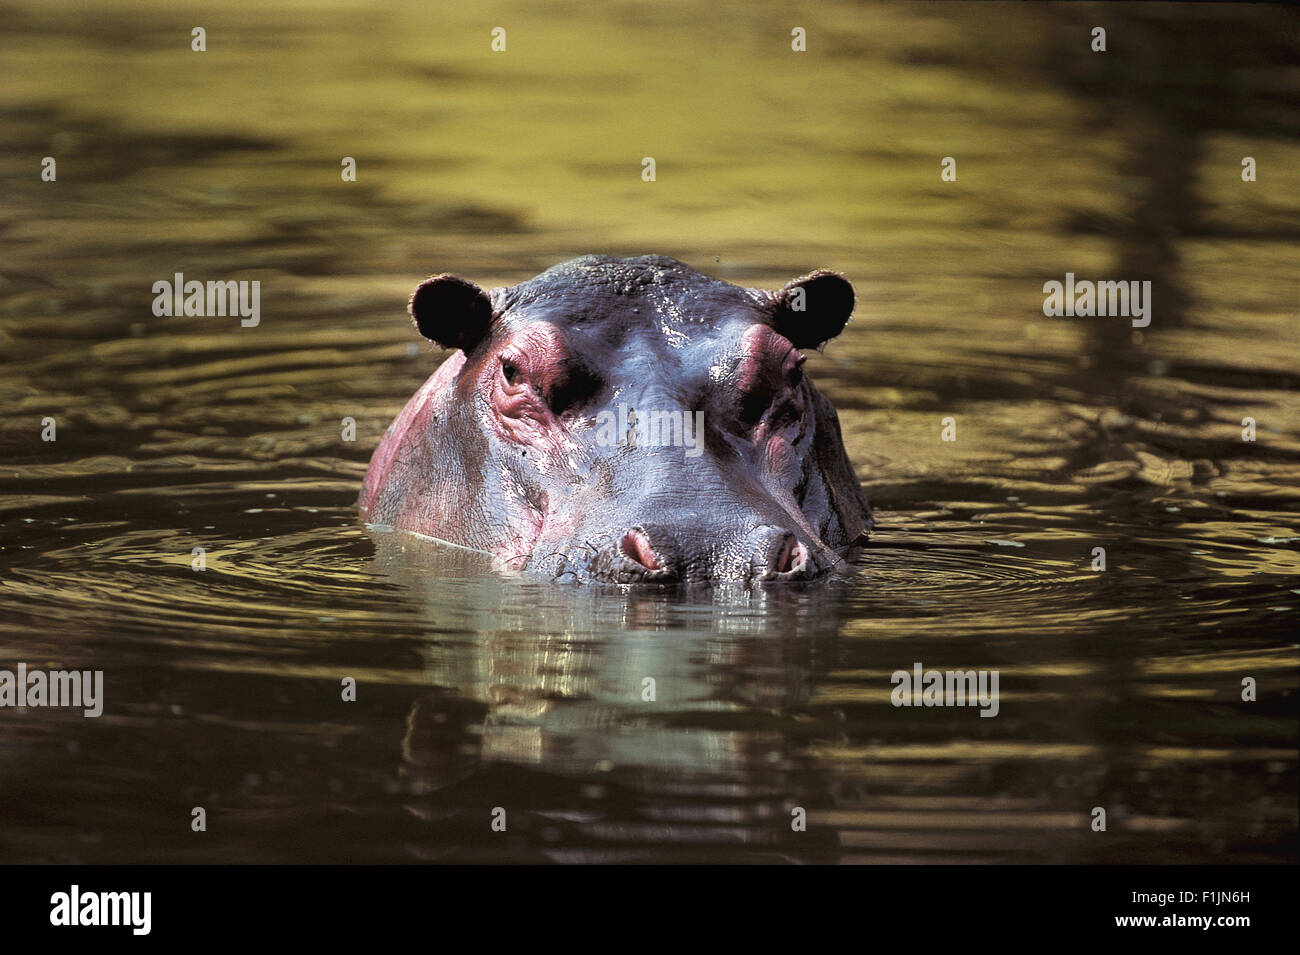 Hippo's head coming out of the water Stock Photo